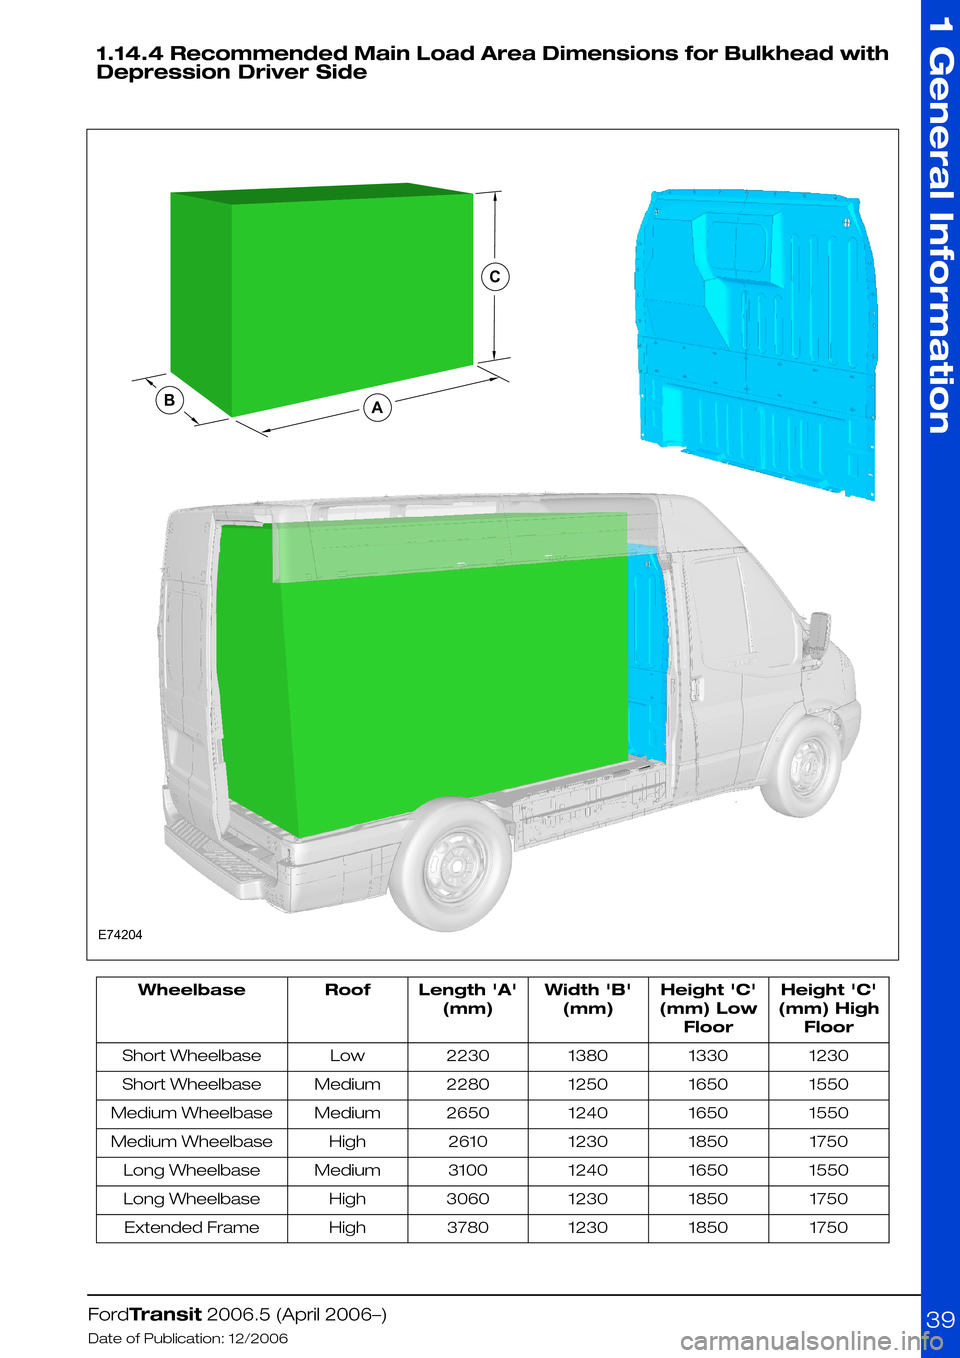 FORD TRANSIT 2006 7.G Body And Equipment Mounting Section Manual 1.14.4 Recommended Main Load Area Dimensions for Bulkhead with
Depression Driver Side
 
Height C
(mm) High
Floor
Height C
(mm) Low
Floor
Width B
(mm)
Length A
(mm)
RoofWheelbase
12301330138022